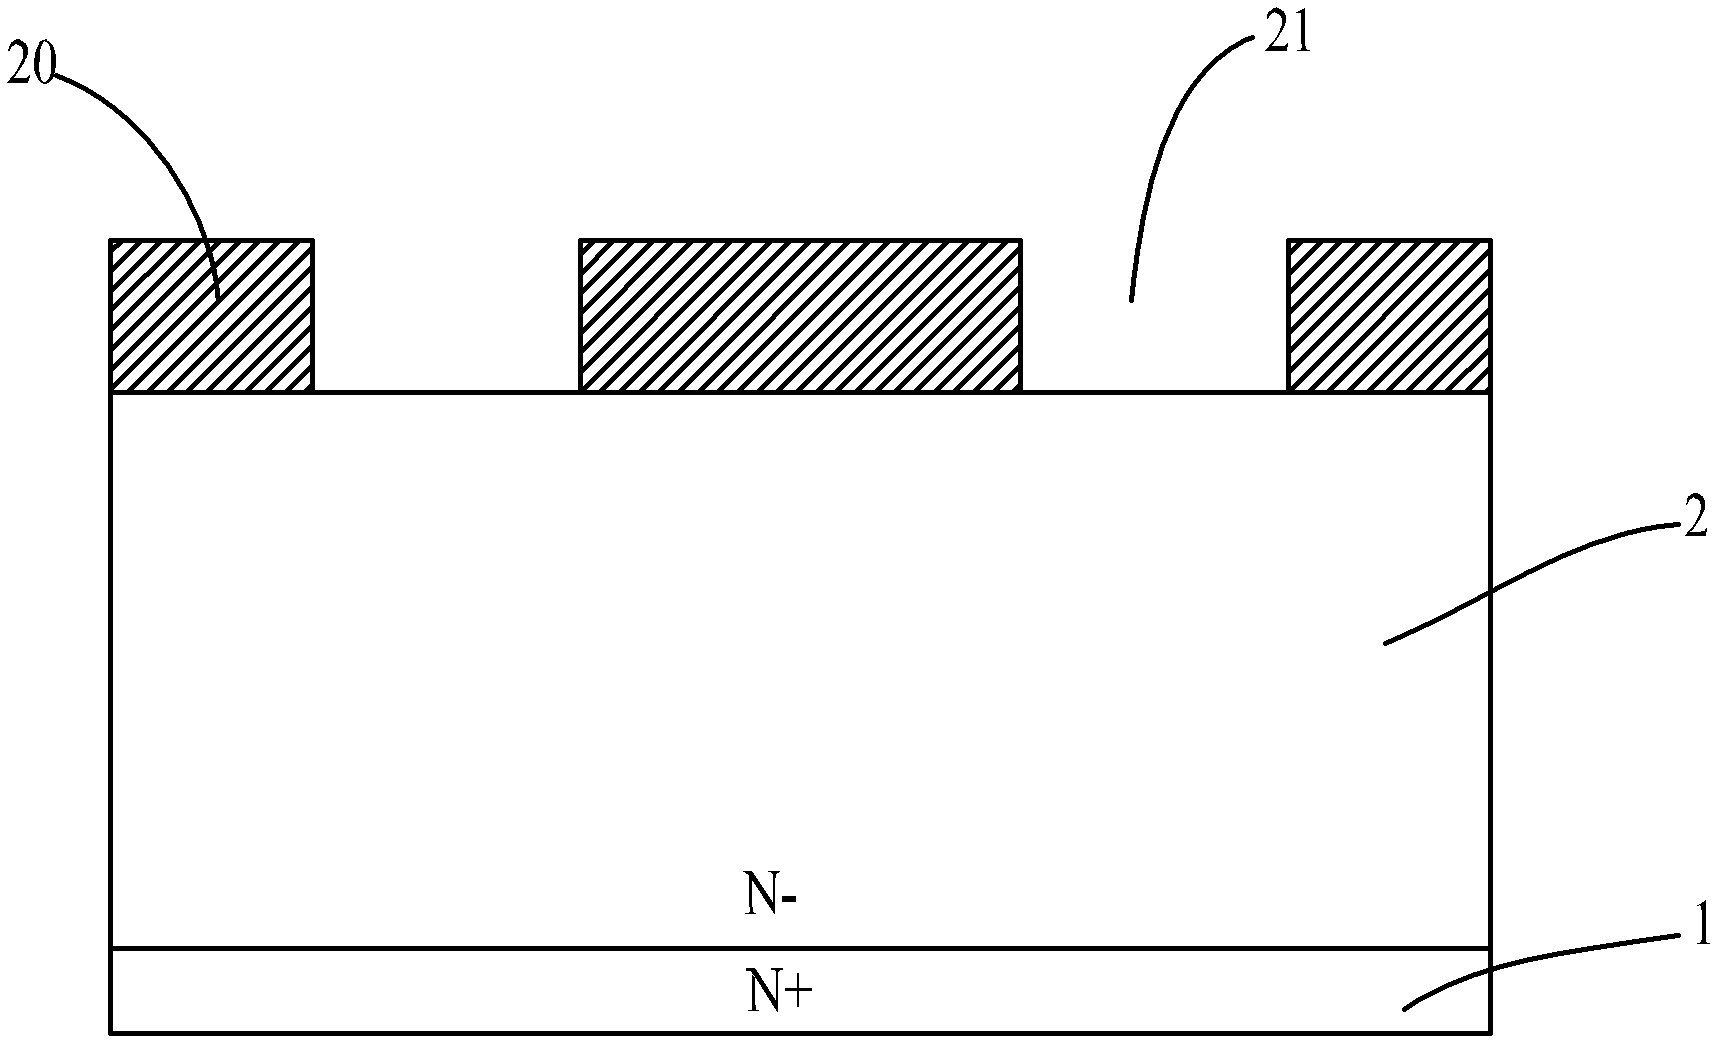 A novel trench structure power mosfet device and its manufacturing method